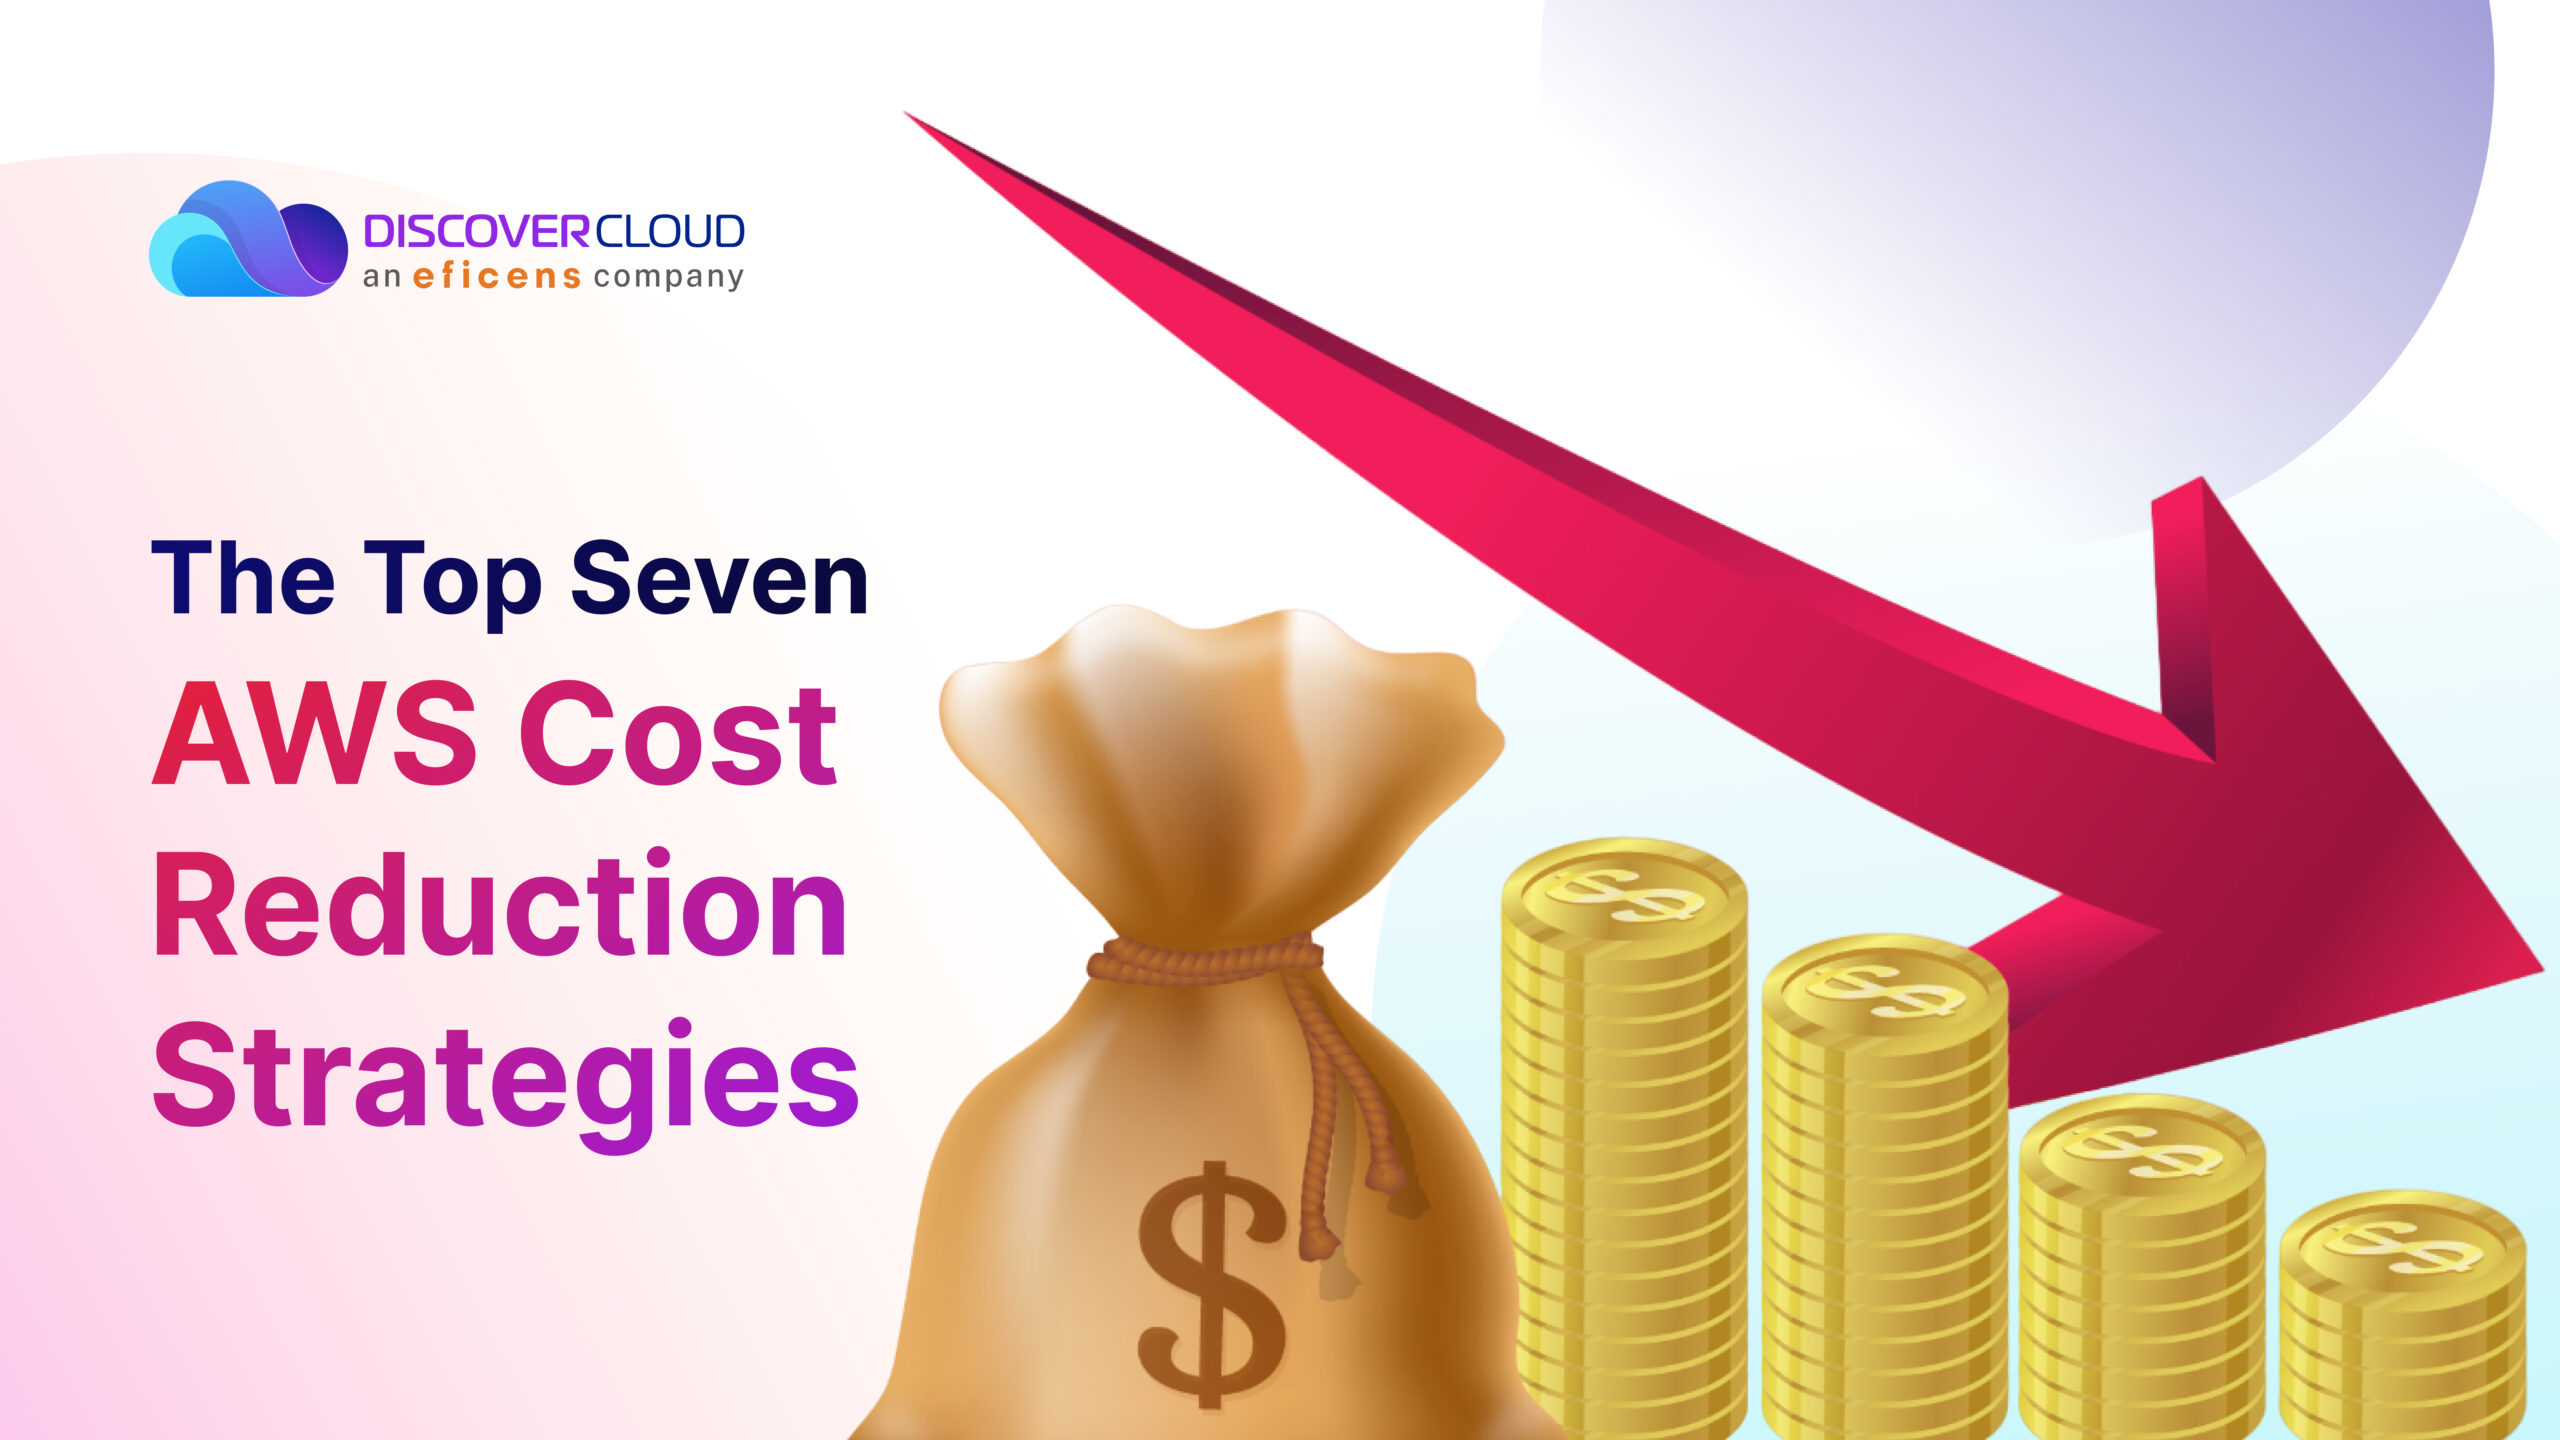 The Top Seven AWS Cost Reduction Strategies